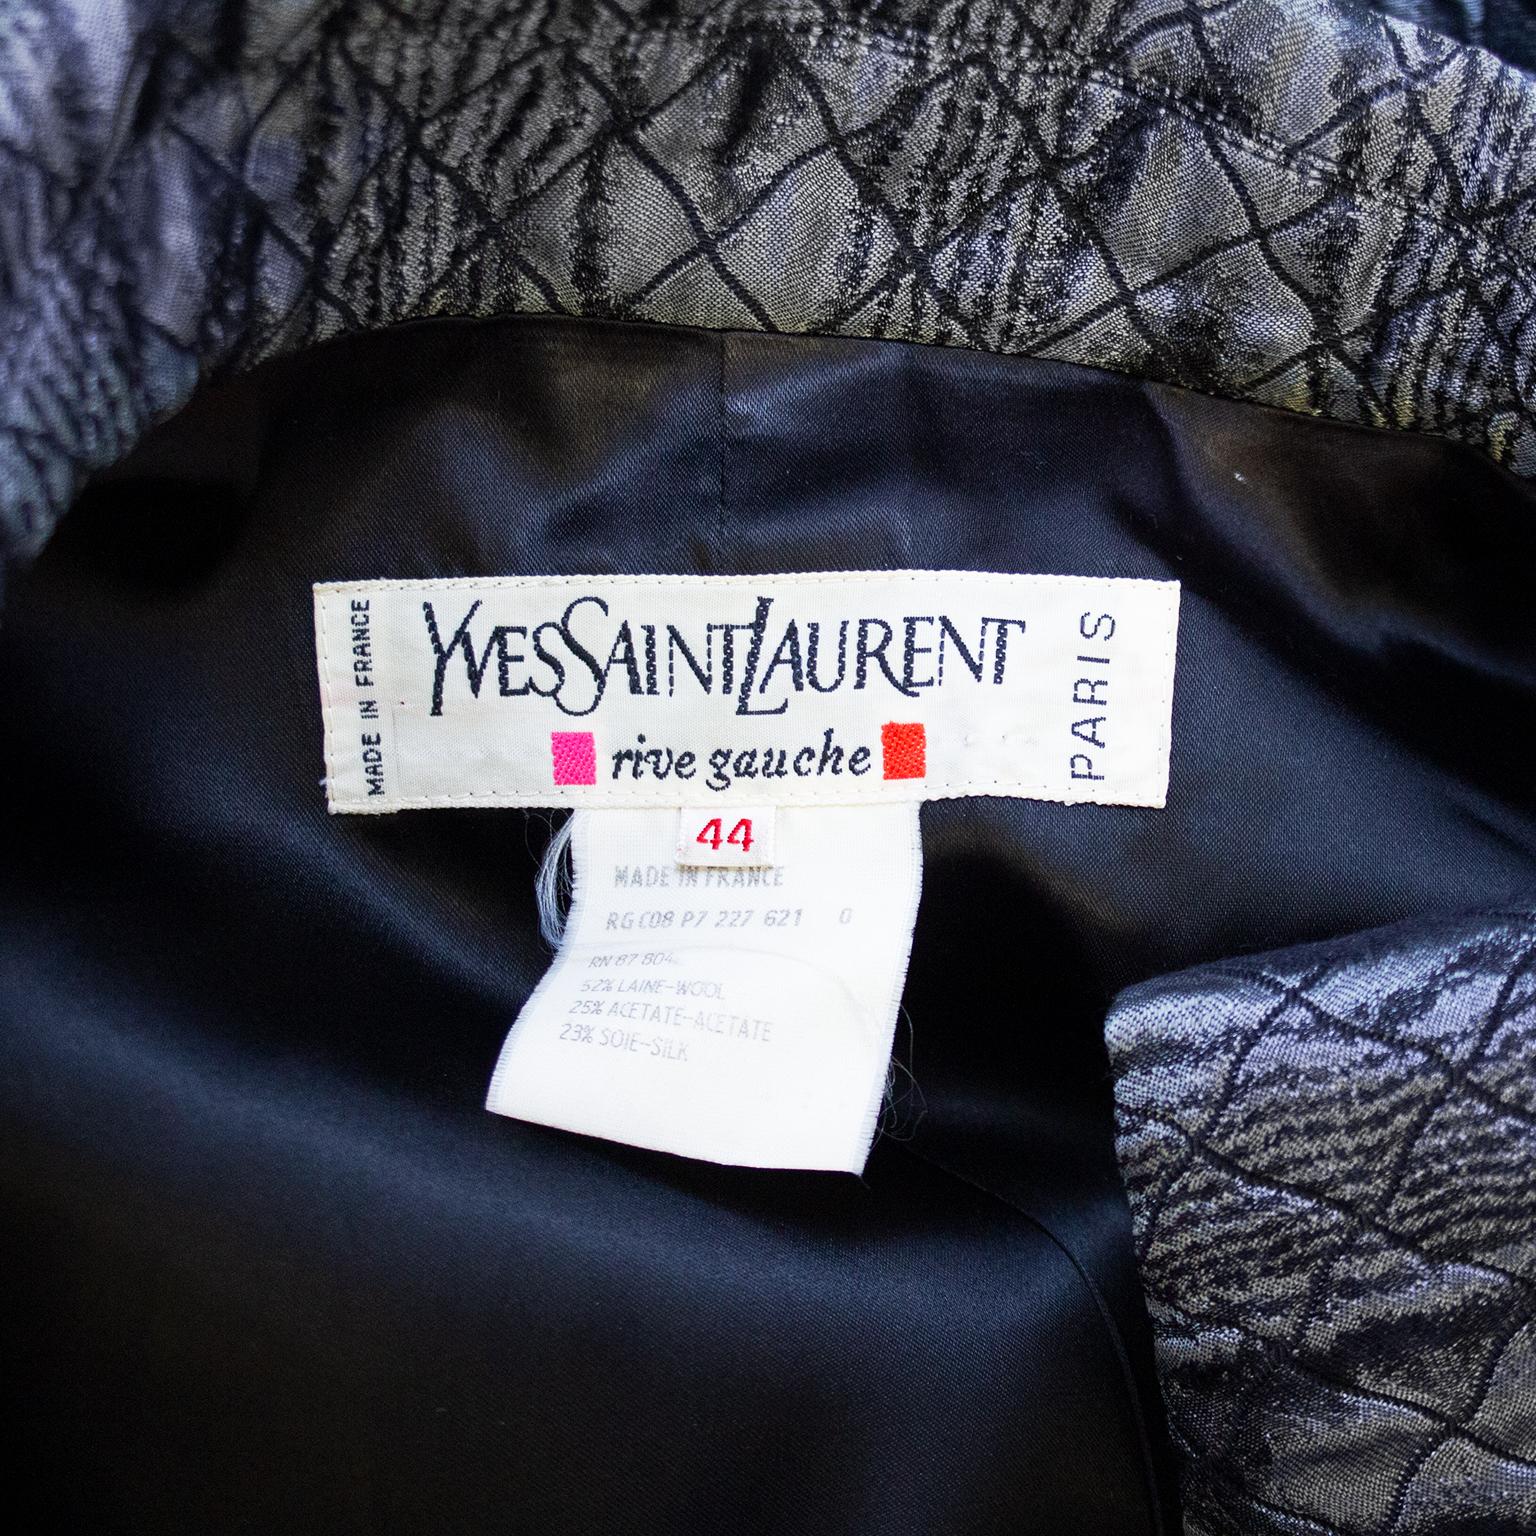 1980s Yves Saint Laurent Gunmetal Quilted Snakeskin Pattern Jacket In Good Condition For Sale In Toronto, Ontario